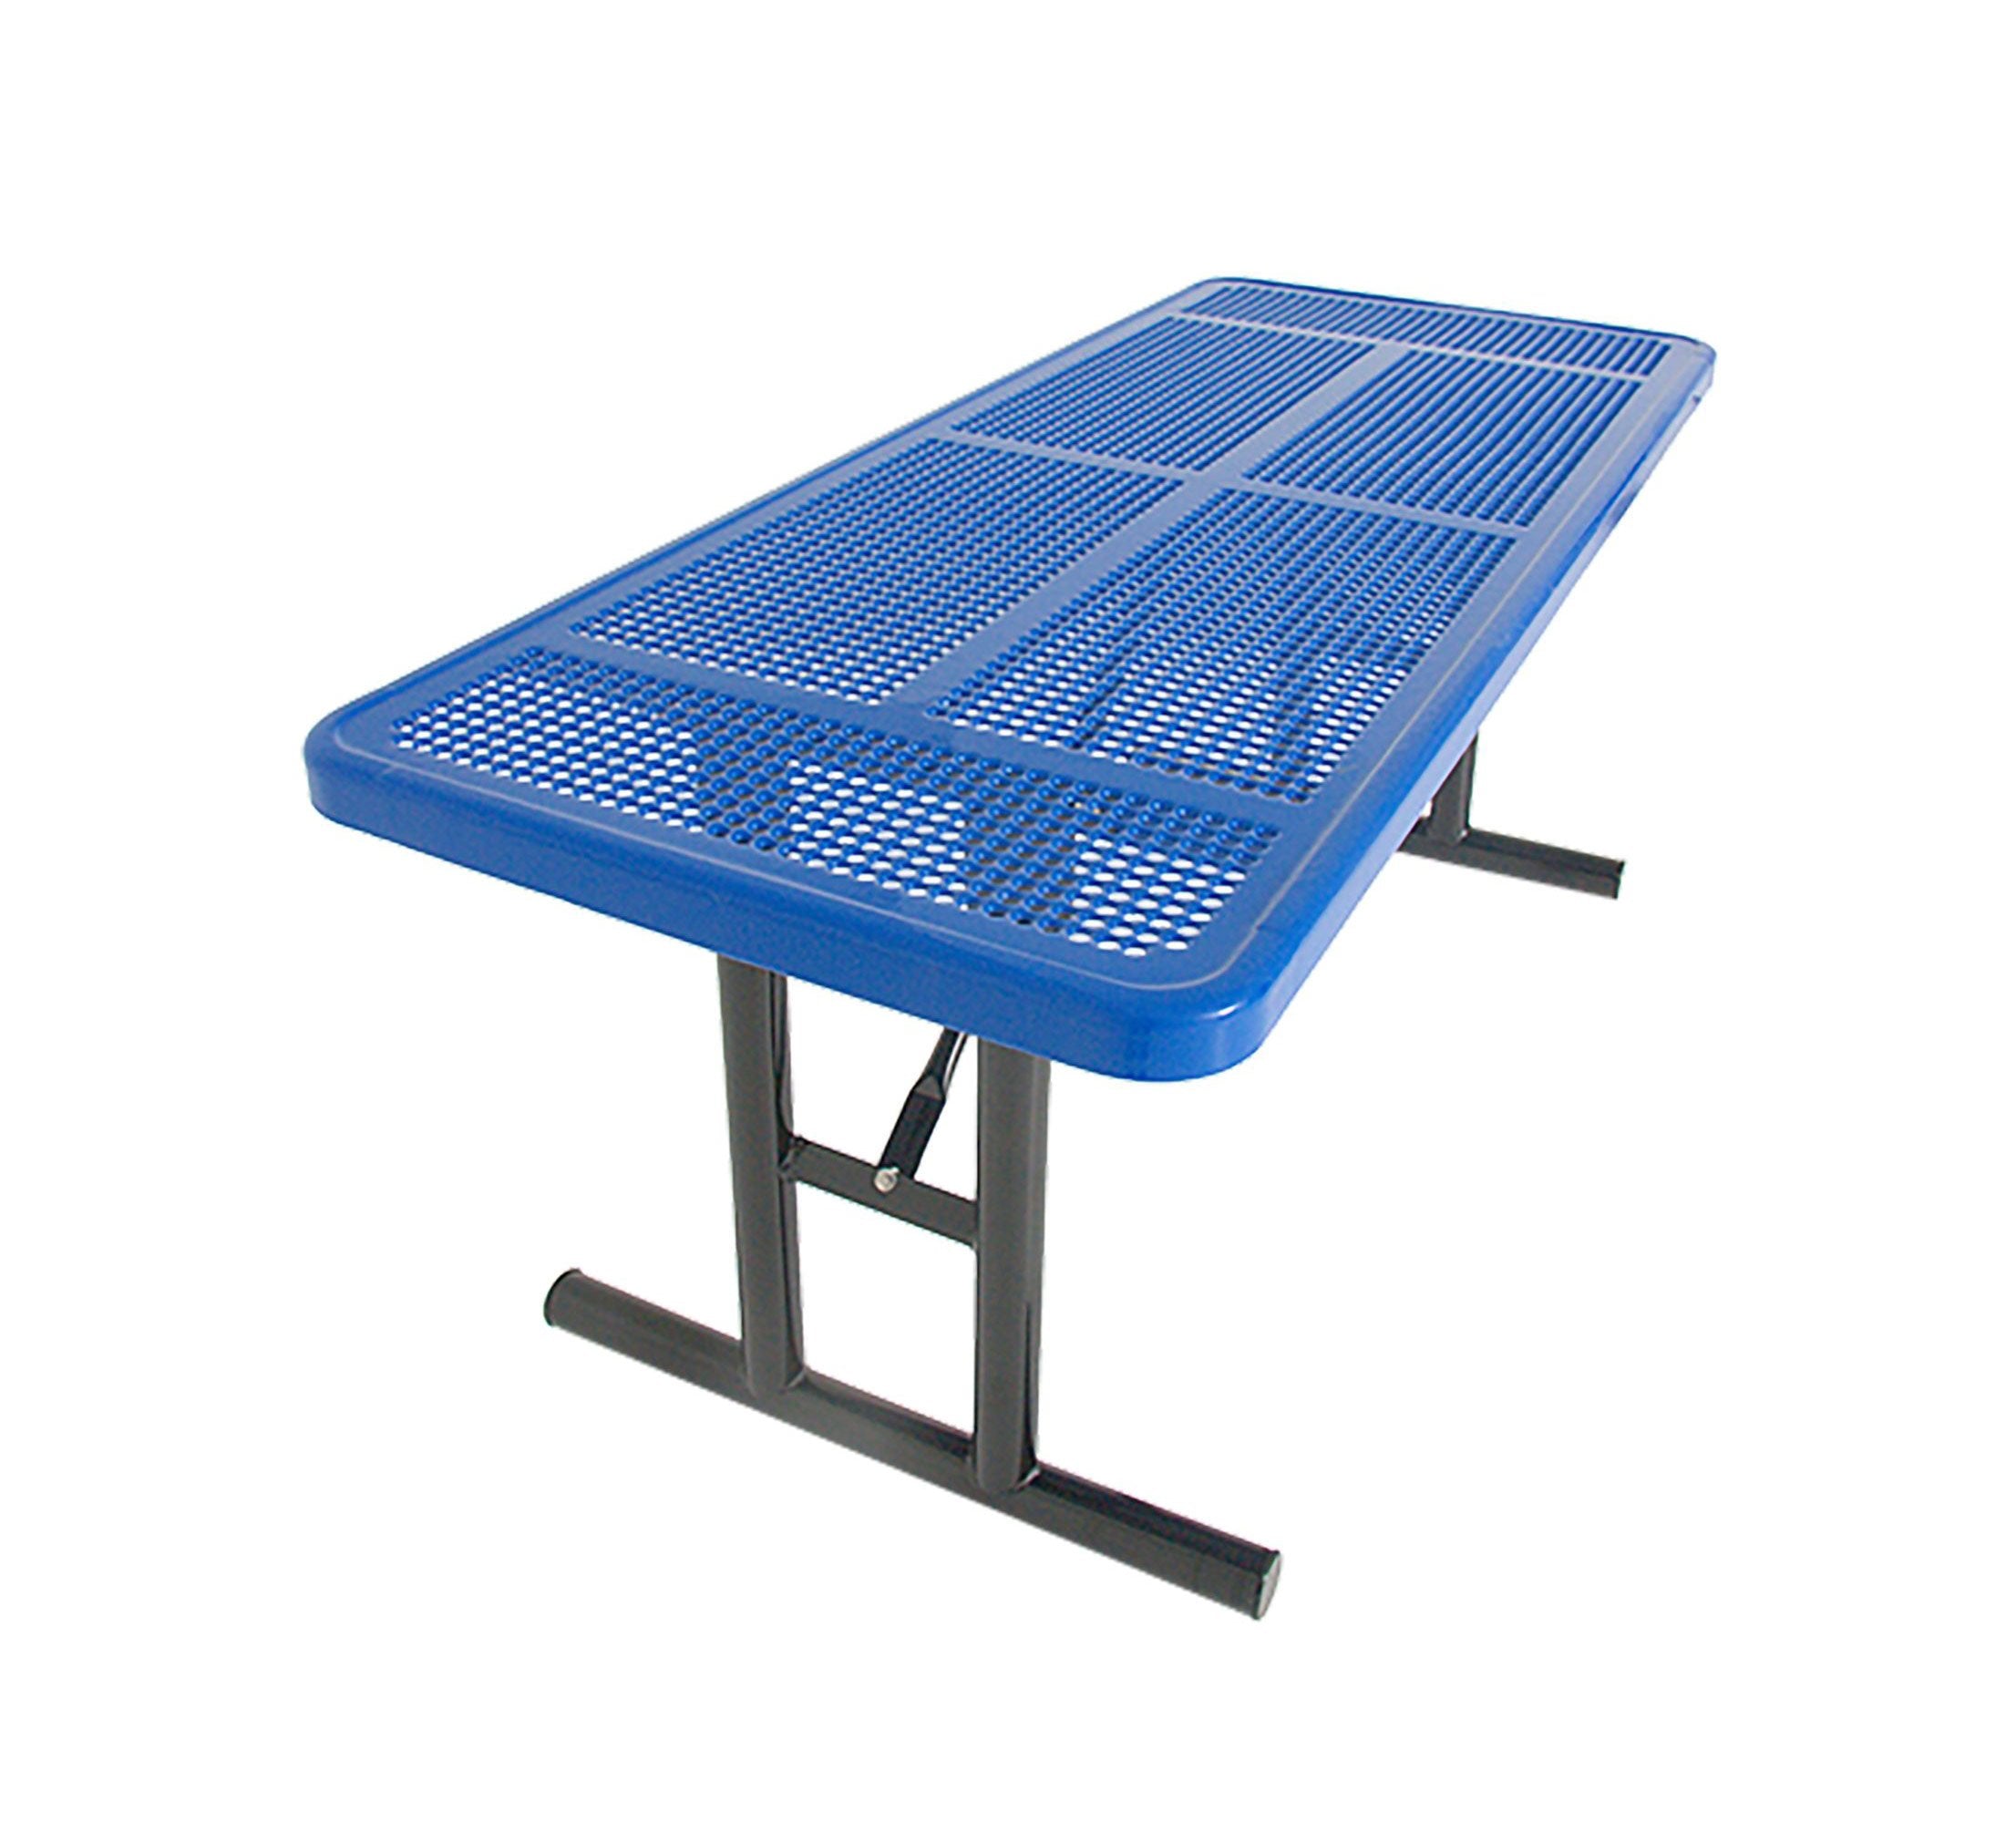 Portable Multi Pedestal Perforated Utility Table 8 Foot